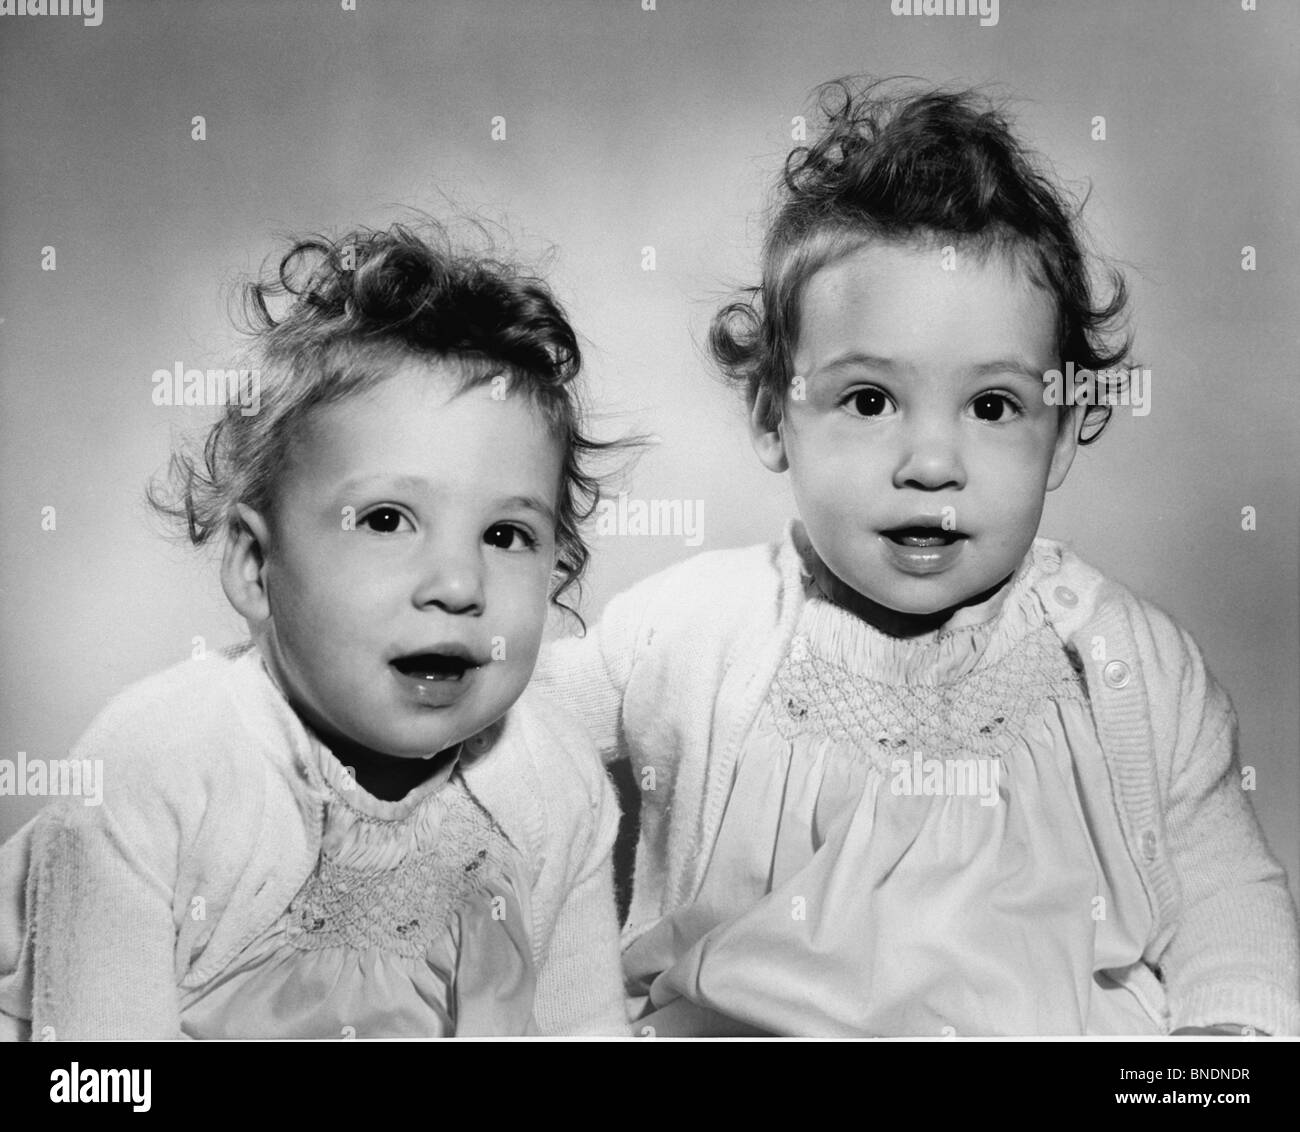 Child catching Black and White Stock Photos & Images - Page 2 - Alamy